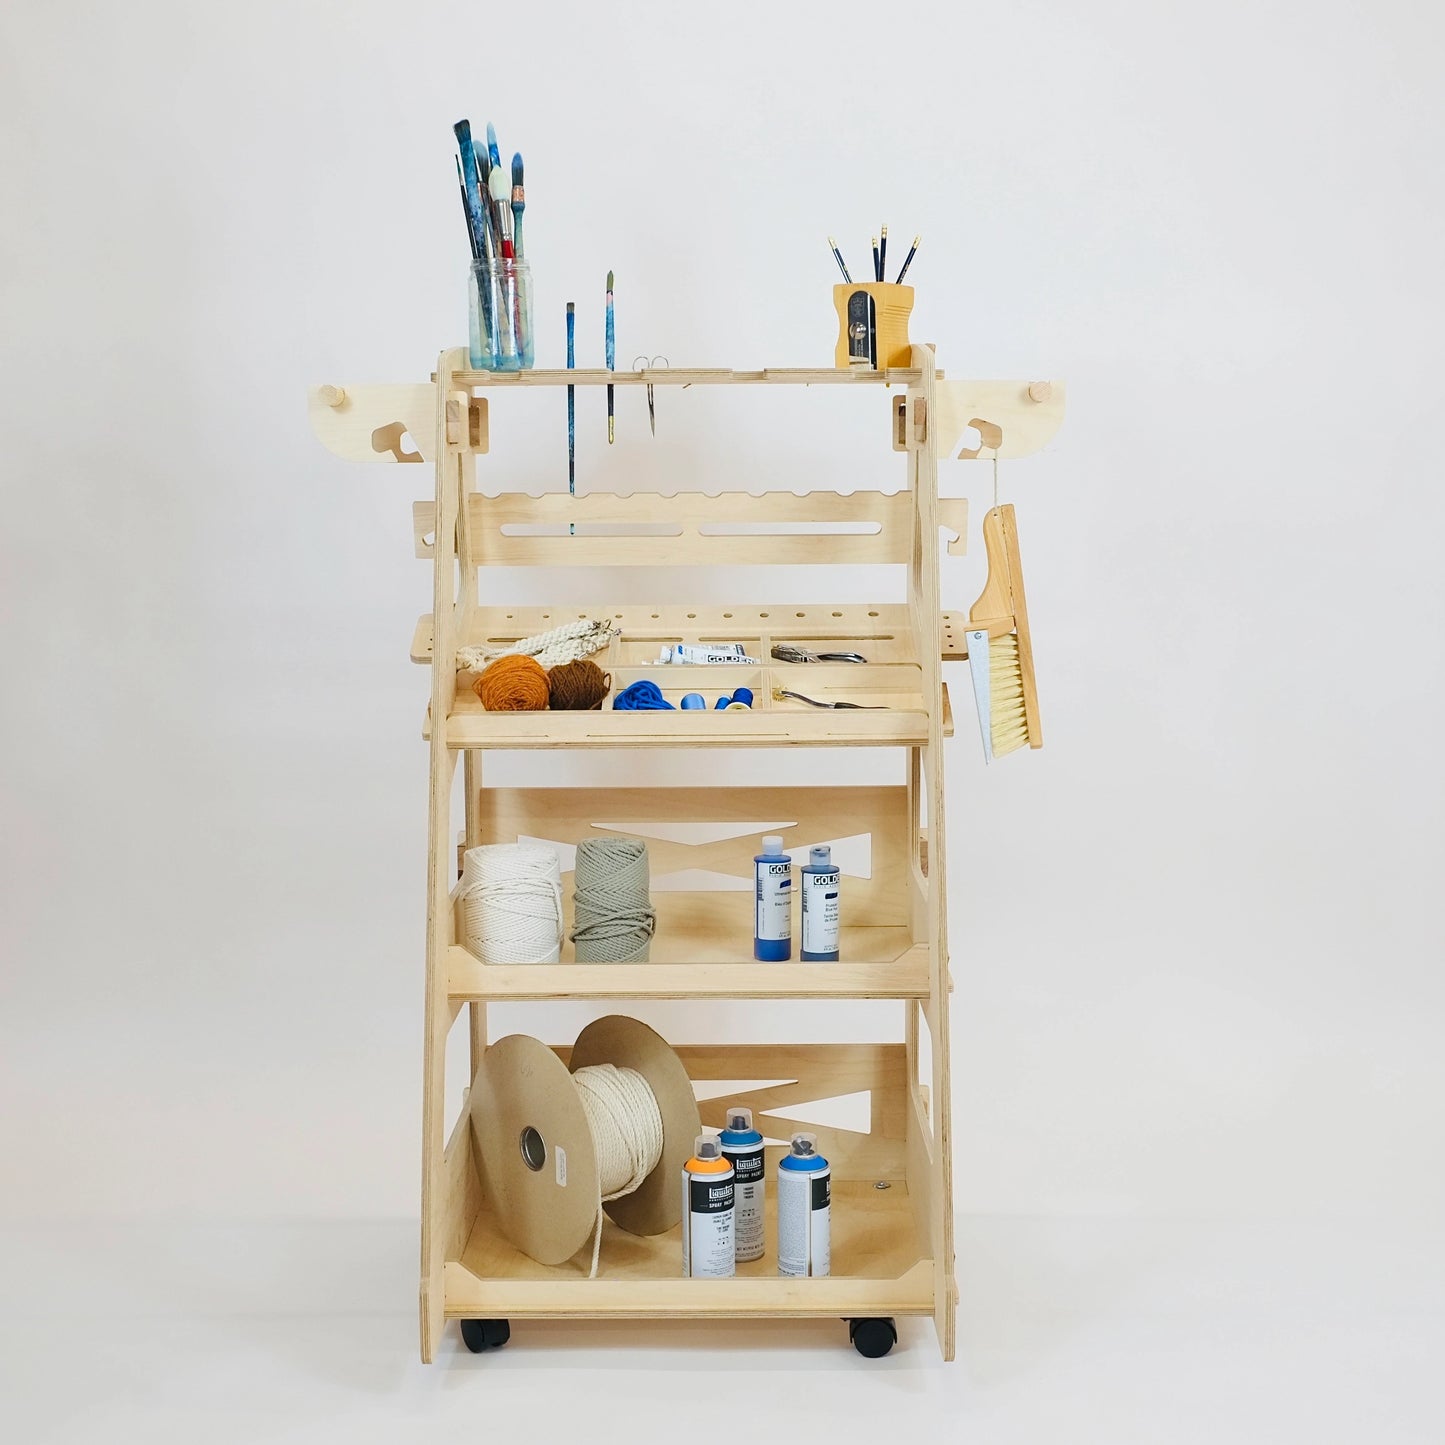 Pale birch plywood tool trolley with 3 shelving trays containing art supplies , rope & wool in tray dividers. Dust pan & brush hanging off wooden side hooks. Tool trolley on 4 castors facing forward against a white wall.